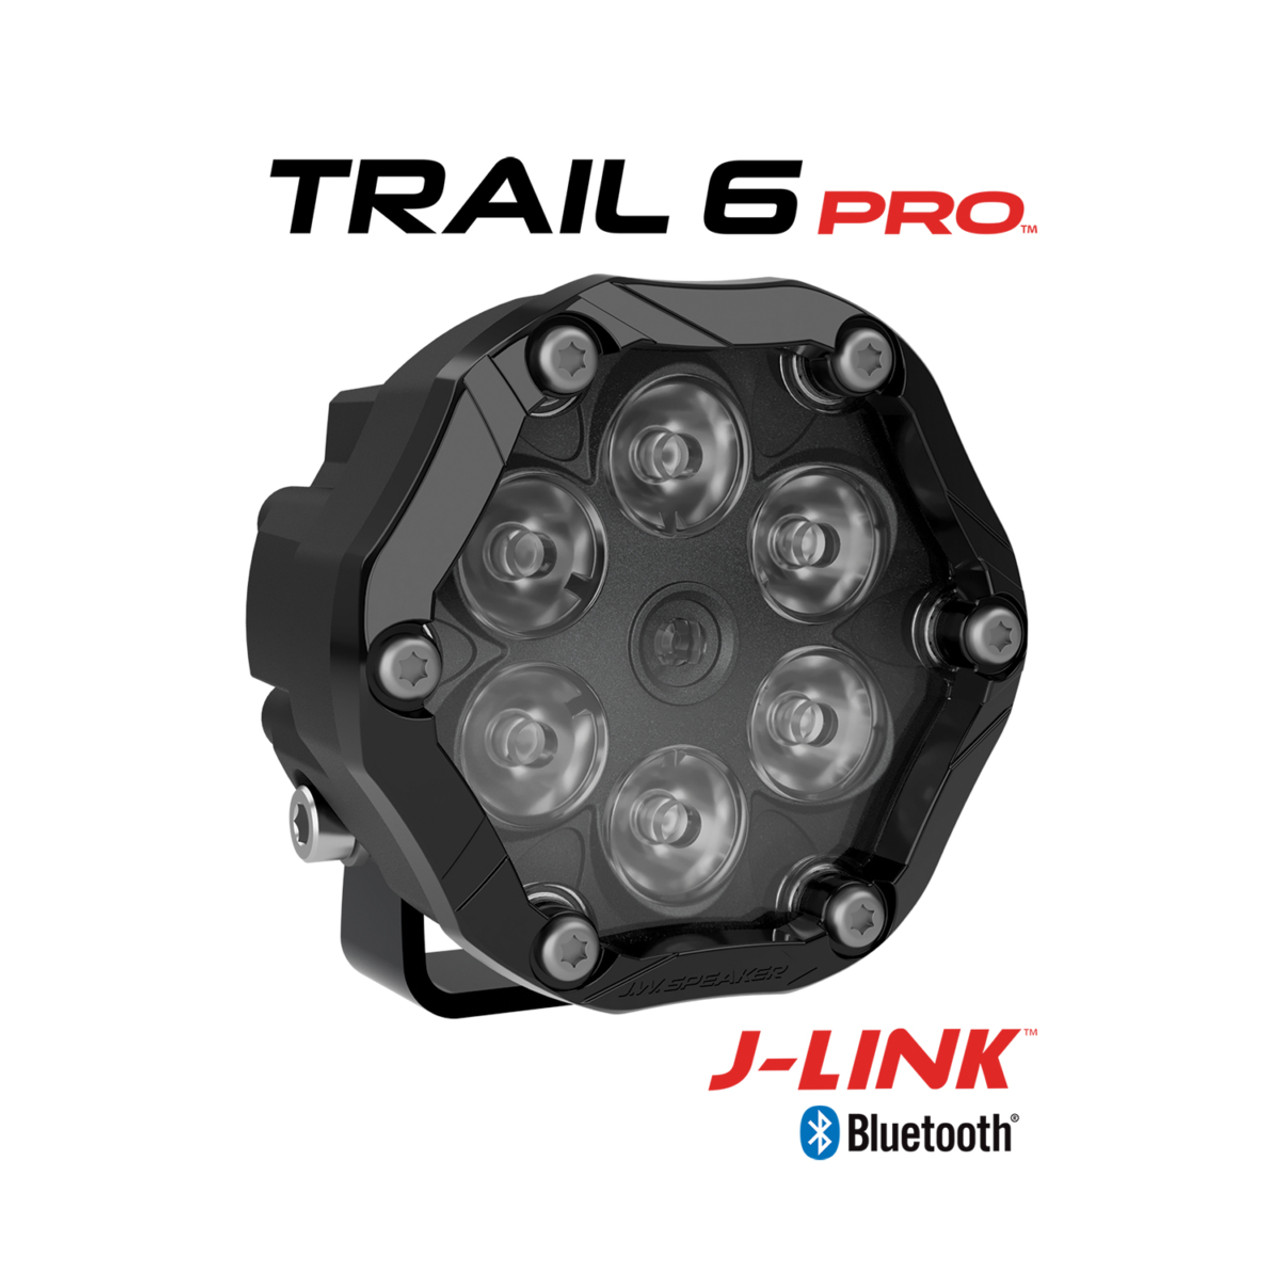 J.W. Speaker 12V LED Off Road Light with Wide Flood Beam Pattern and BlueTooth® - Model Trail 6 Pro